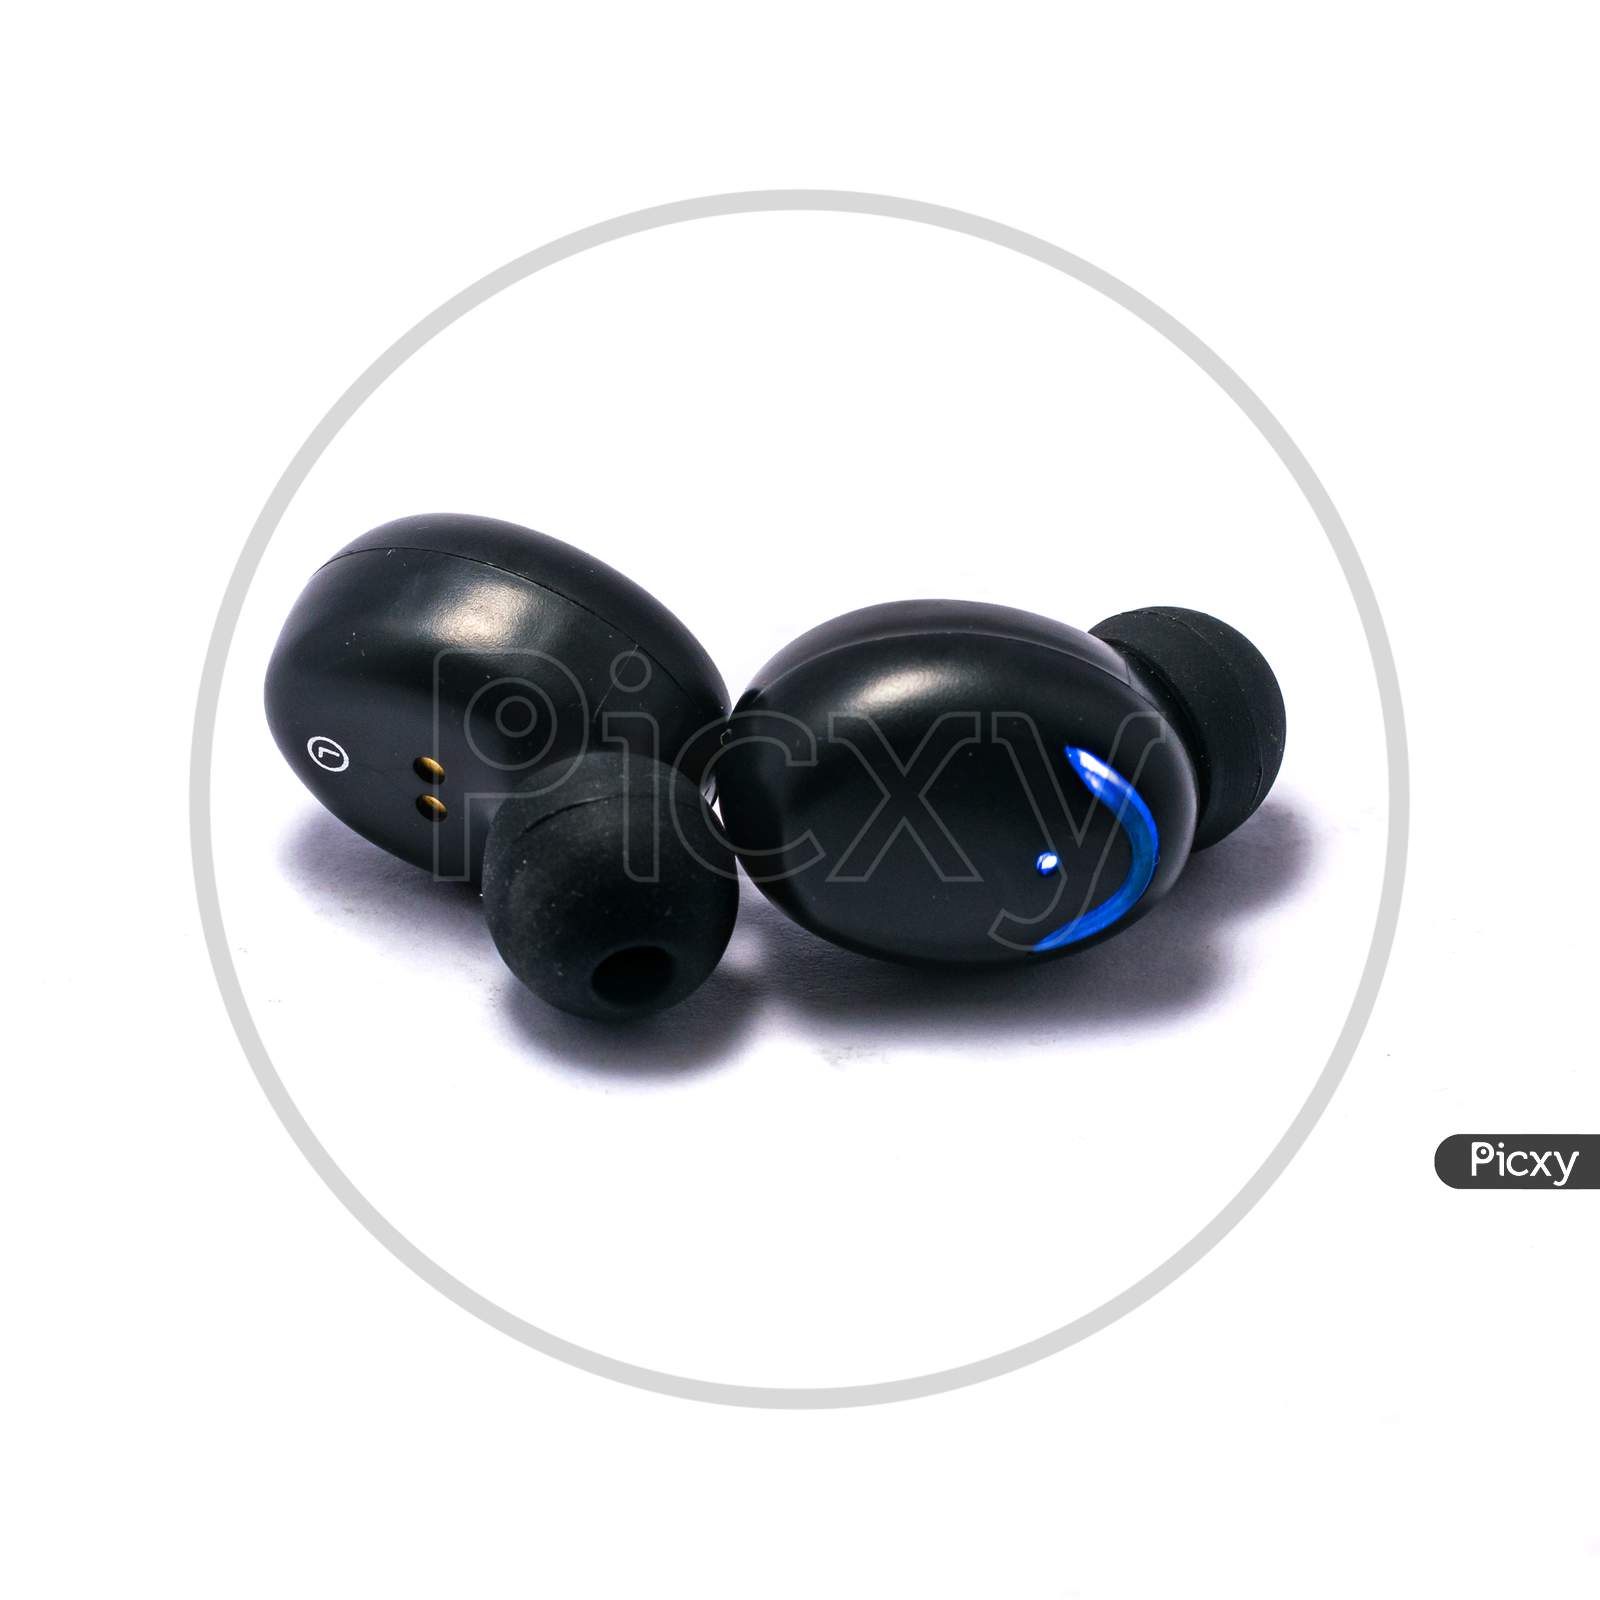 A Pair Of Truly Wireless Earbuds On A Pure White Background With Shadows